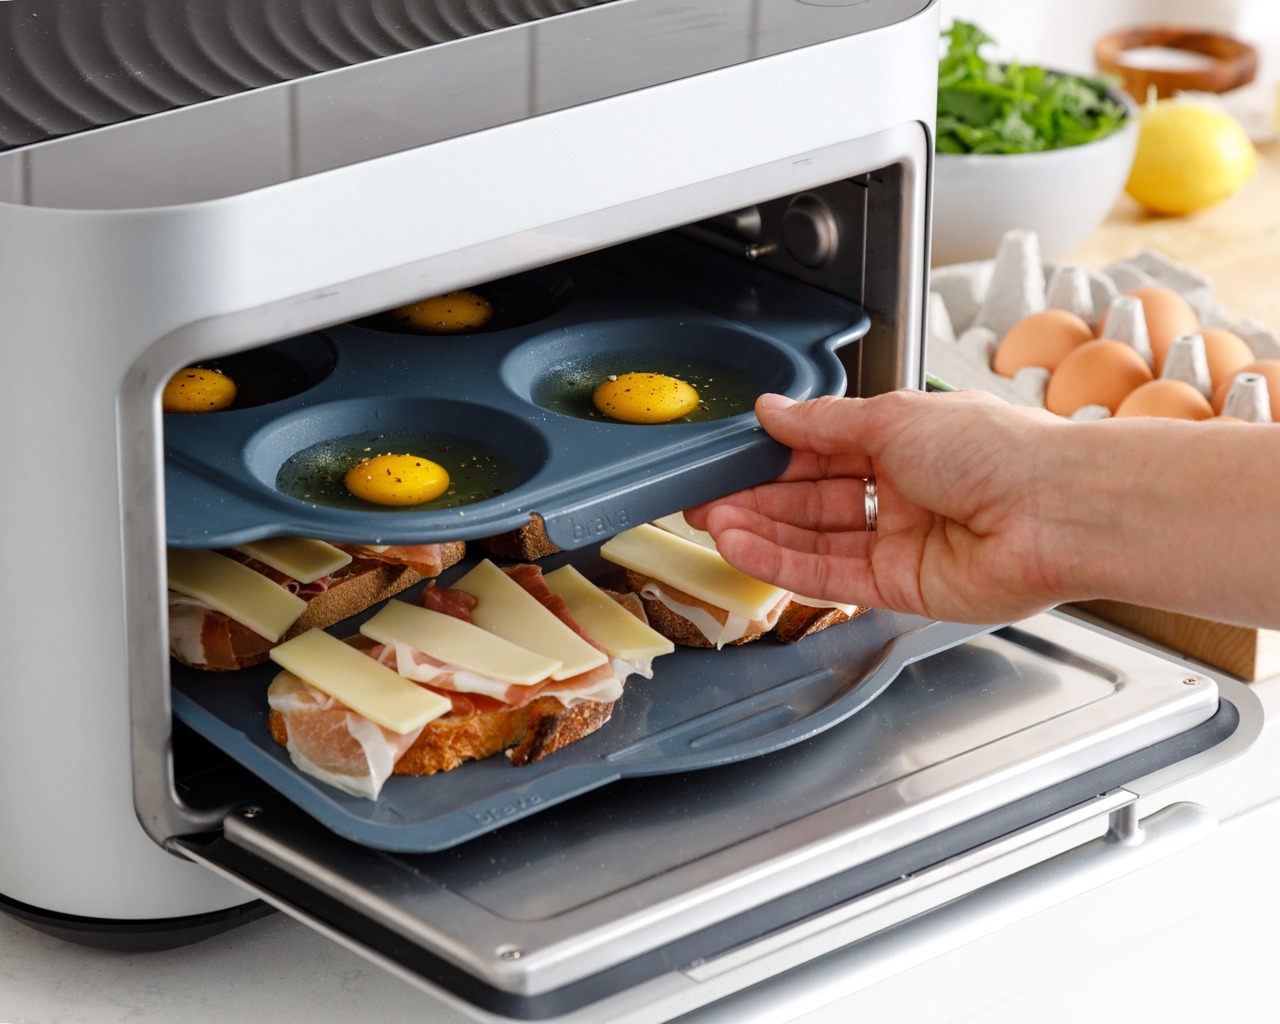 The ‘Tesla of Ovens’ uses light to cook your food better, easier, and faster than ever